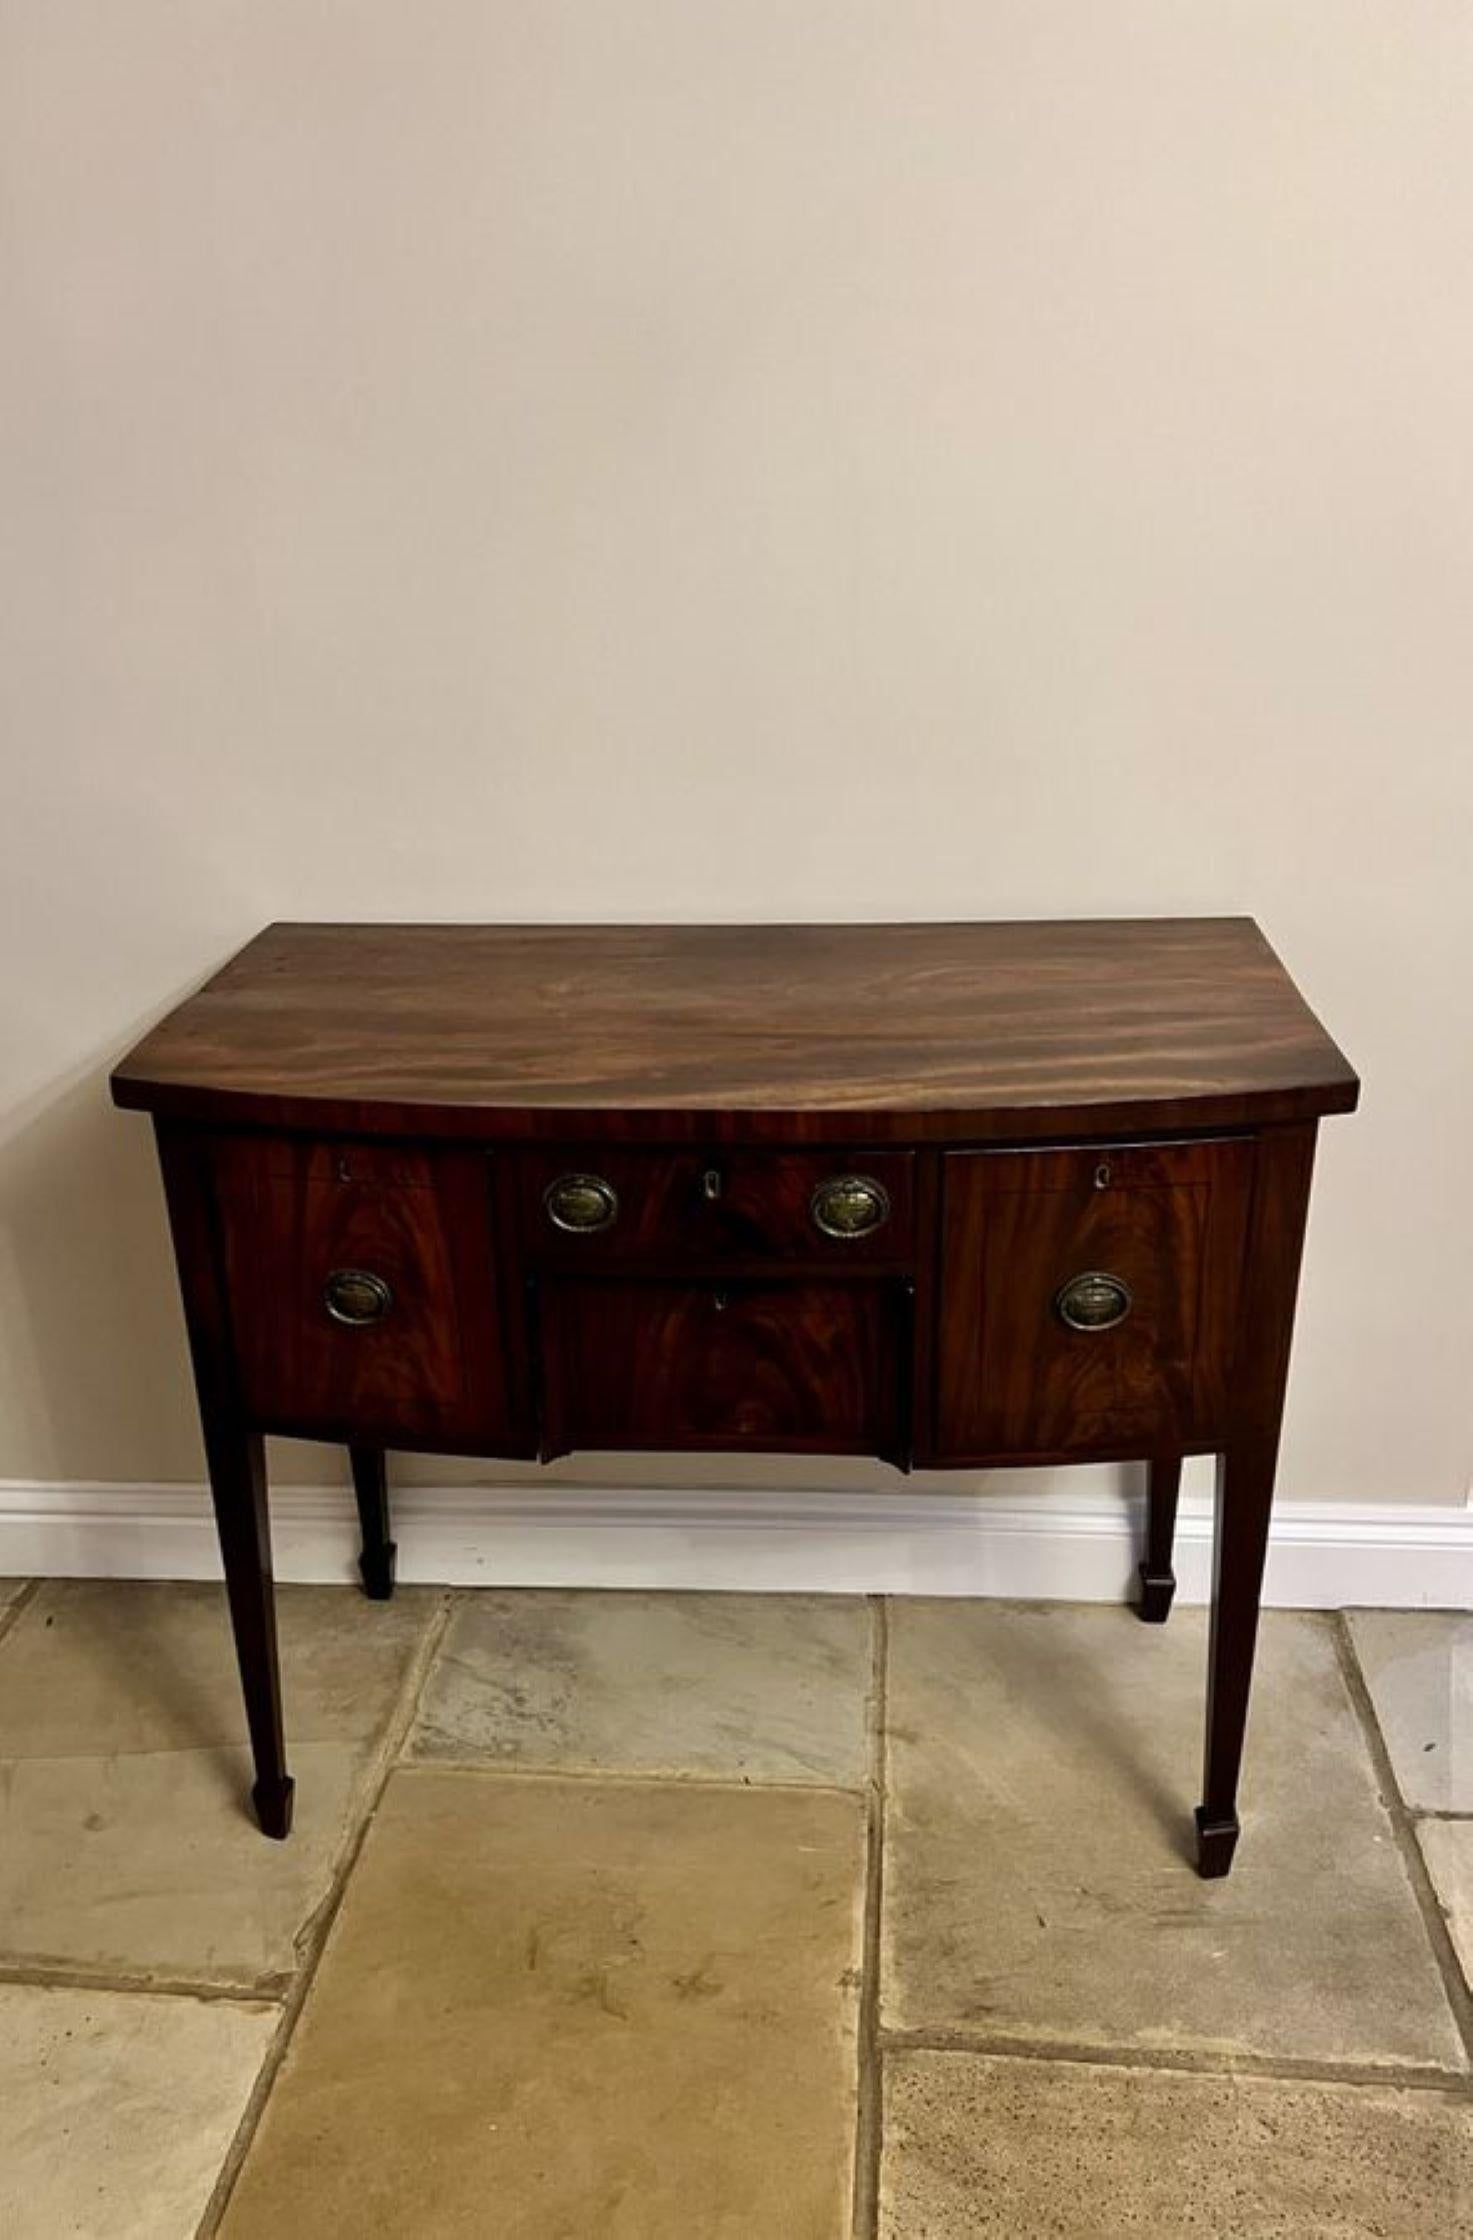 Small antique George III quality mahogany bow fronted sideboard having a quality mahogany bow fronted top, above four drawers with the original handles, standing on square tapering legs with spade feet.

D. 1800